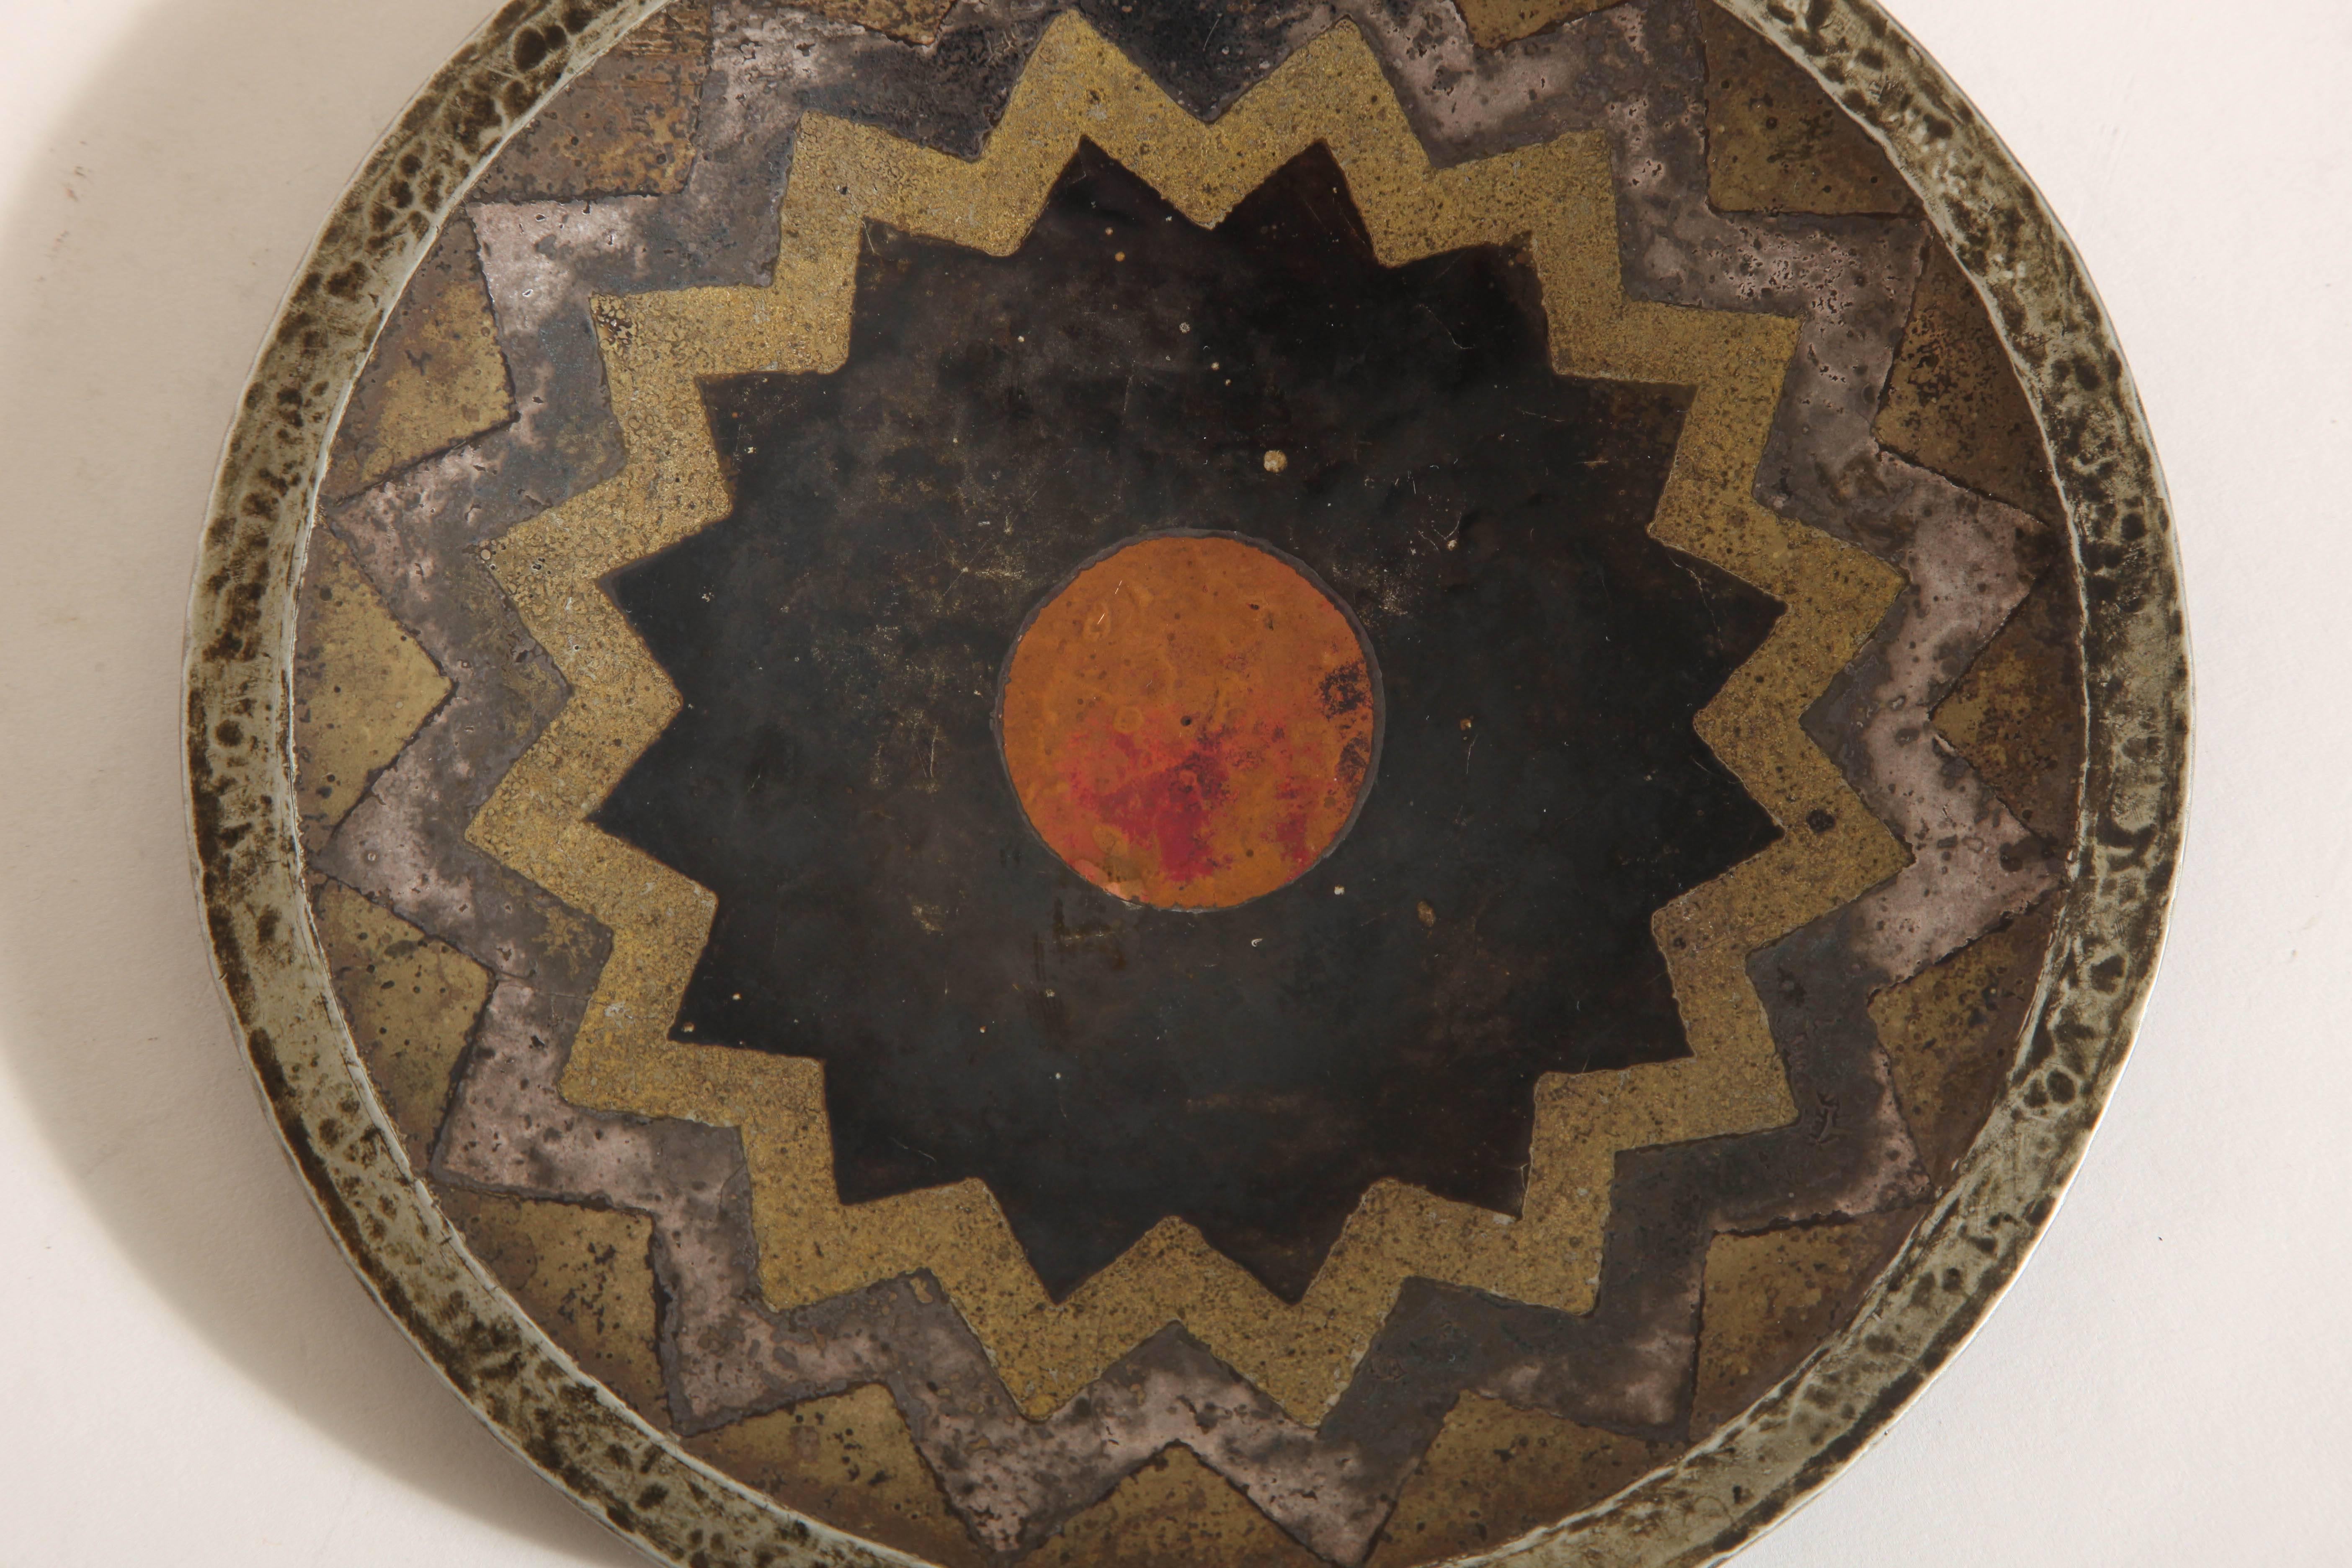 Copper dinanderie coupe with gilded patina and silver, gold and black geometric design and central red copper circle.
Inscribed CL LINOSSIER/ A SON AMI PH. BURNOT EN GAGE D’AMITIE 1926 underneath.

Provenance:
Philippe Burnot
Collection